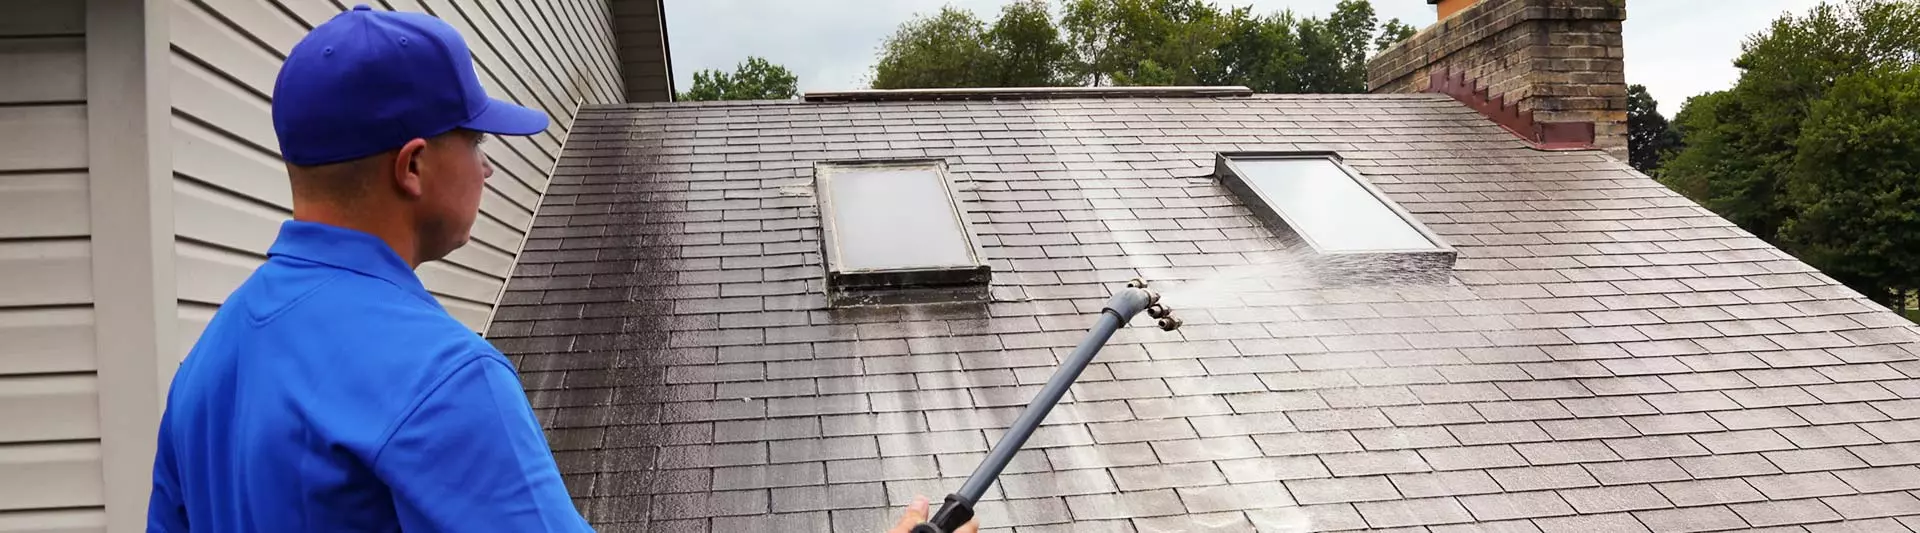 Roof Cleaning Service Near Me Mount Vernon Wa